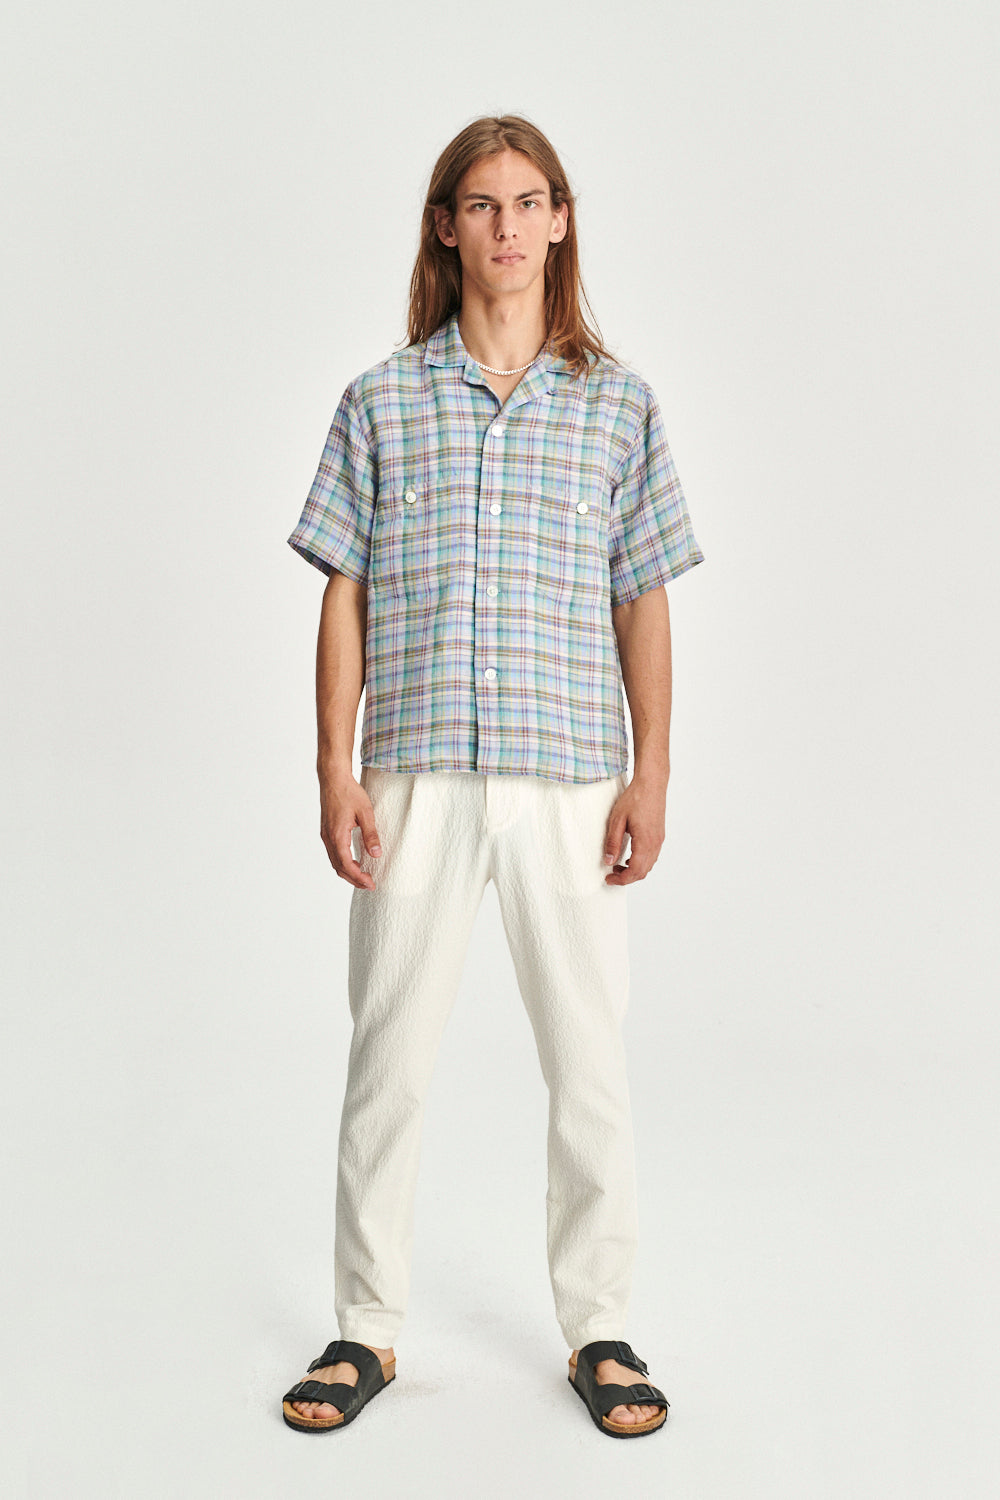 Short Sleeve Camp Collar Shirt in a Vivid Green, Yellow, Light Blue and Rust Red Chequered Italian Linen